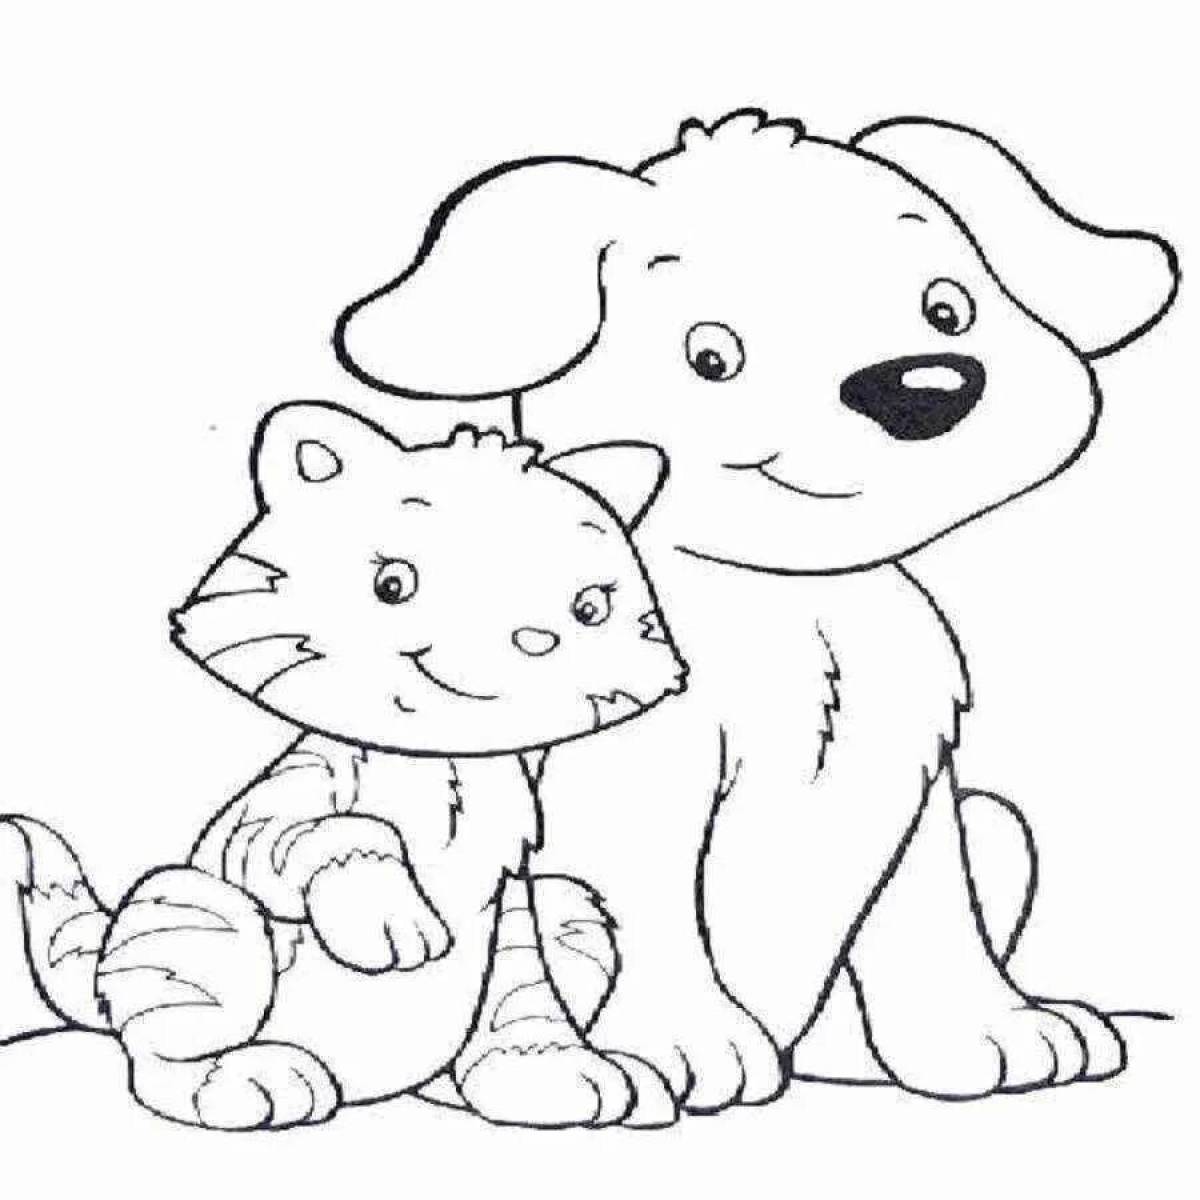 Comic cat and dog coloring book for girls